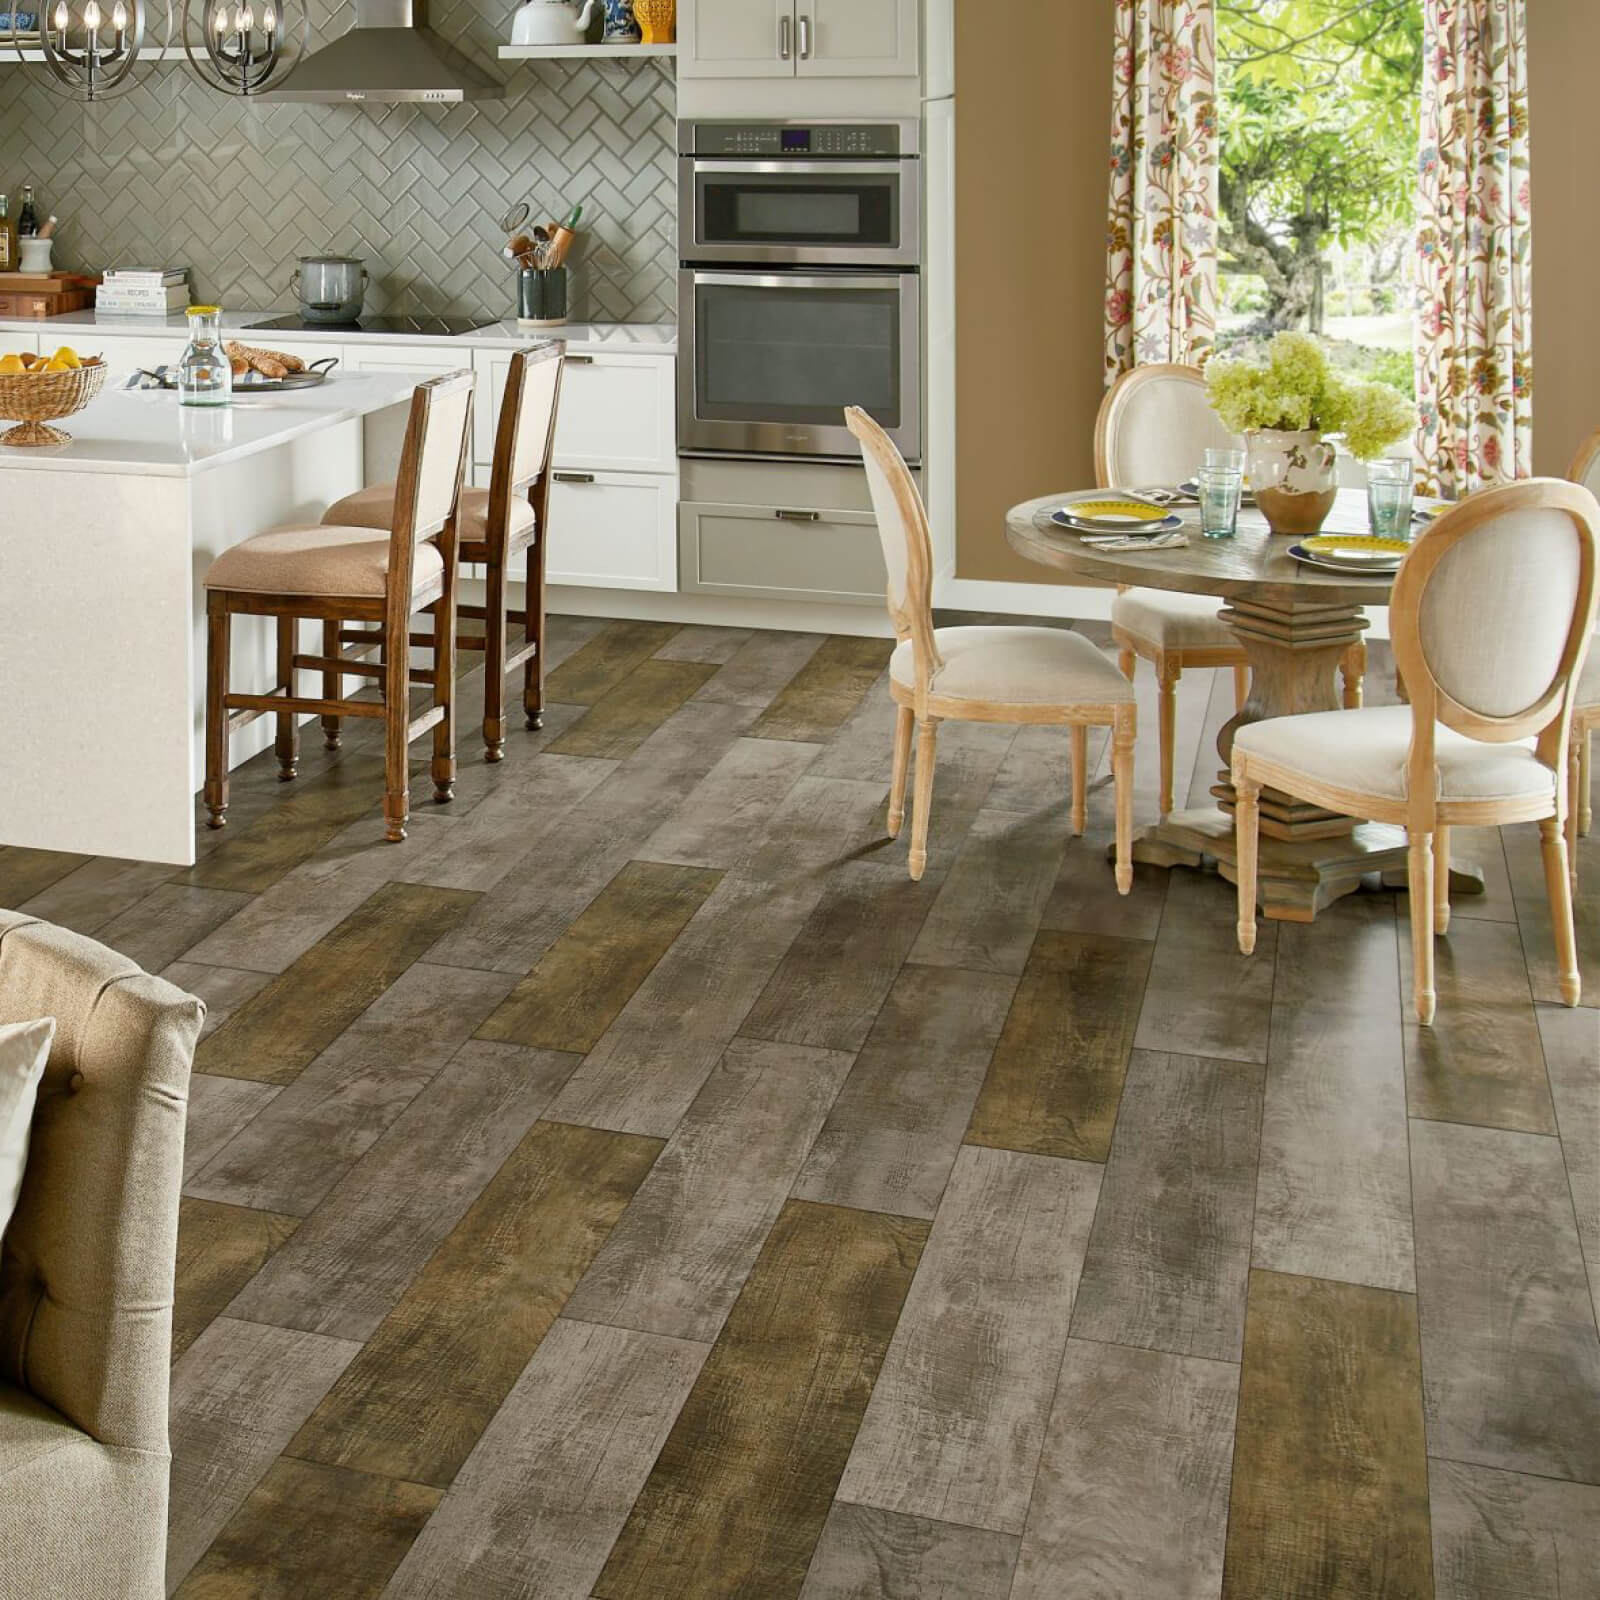 Stylish Vinyl Flooring Looks for Any Room in Your Home